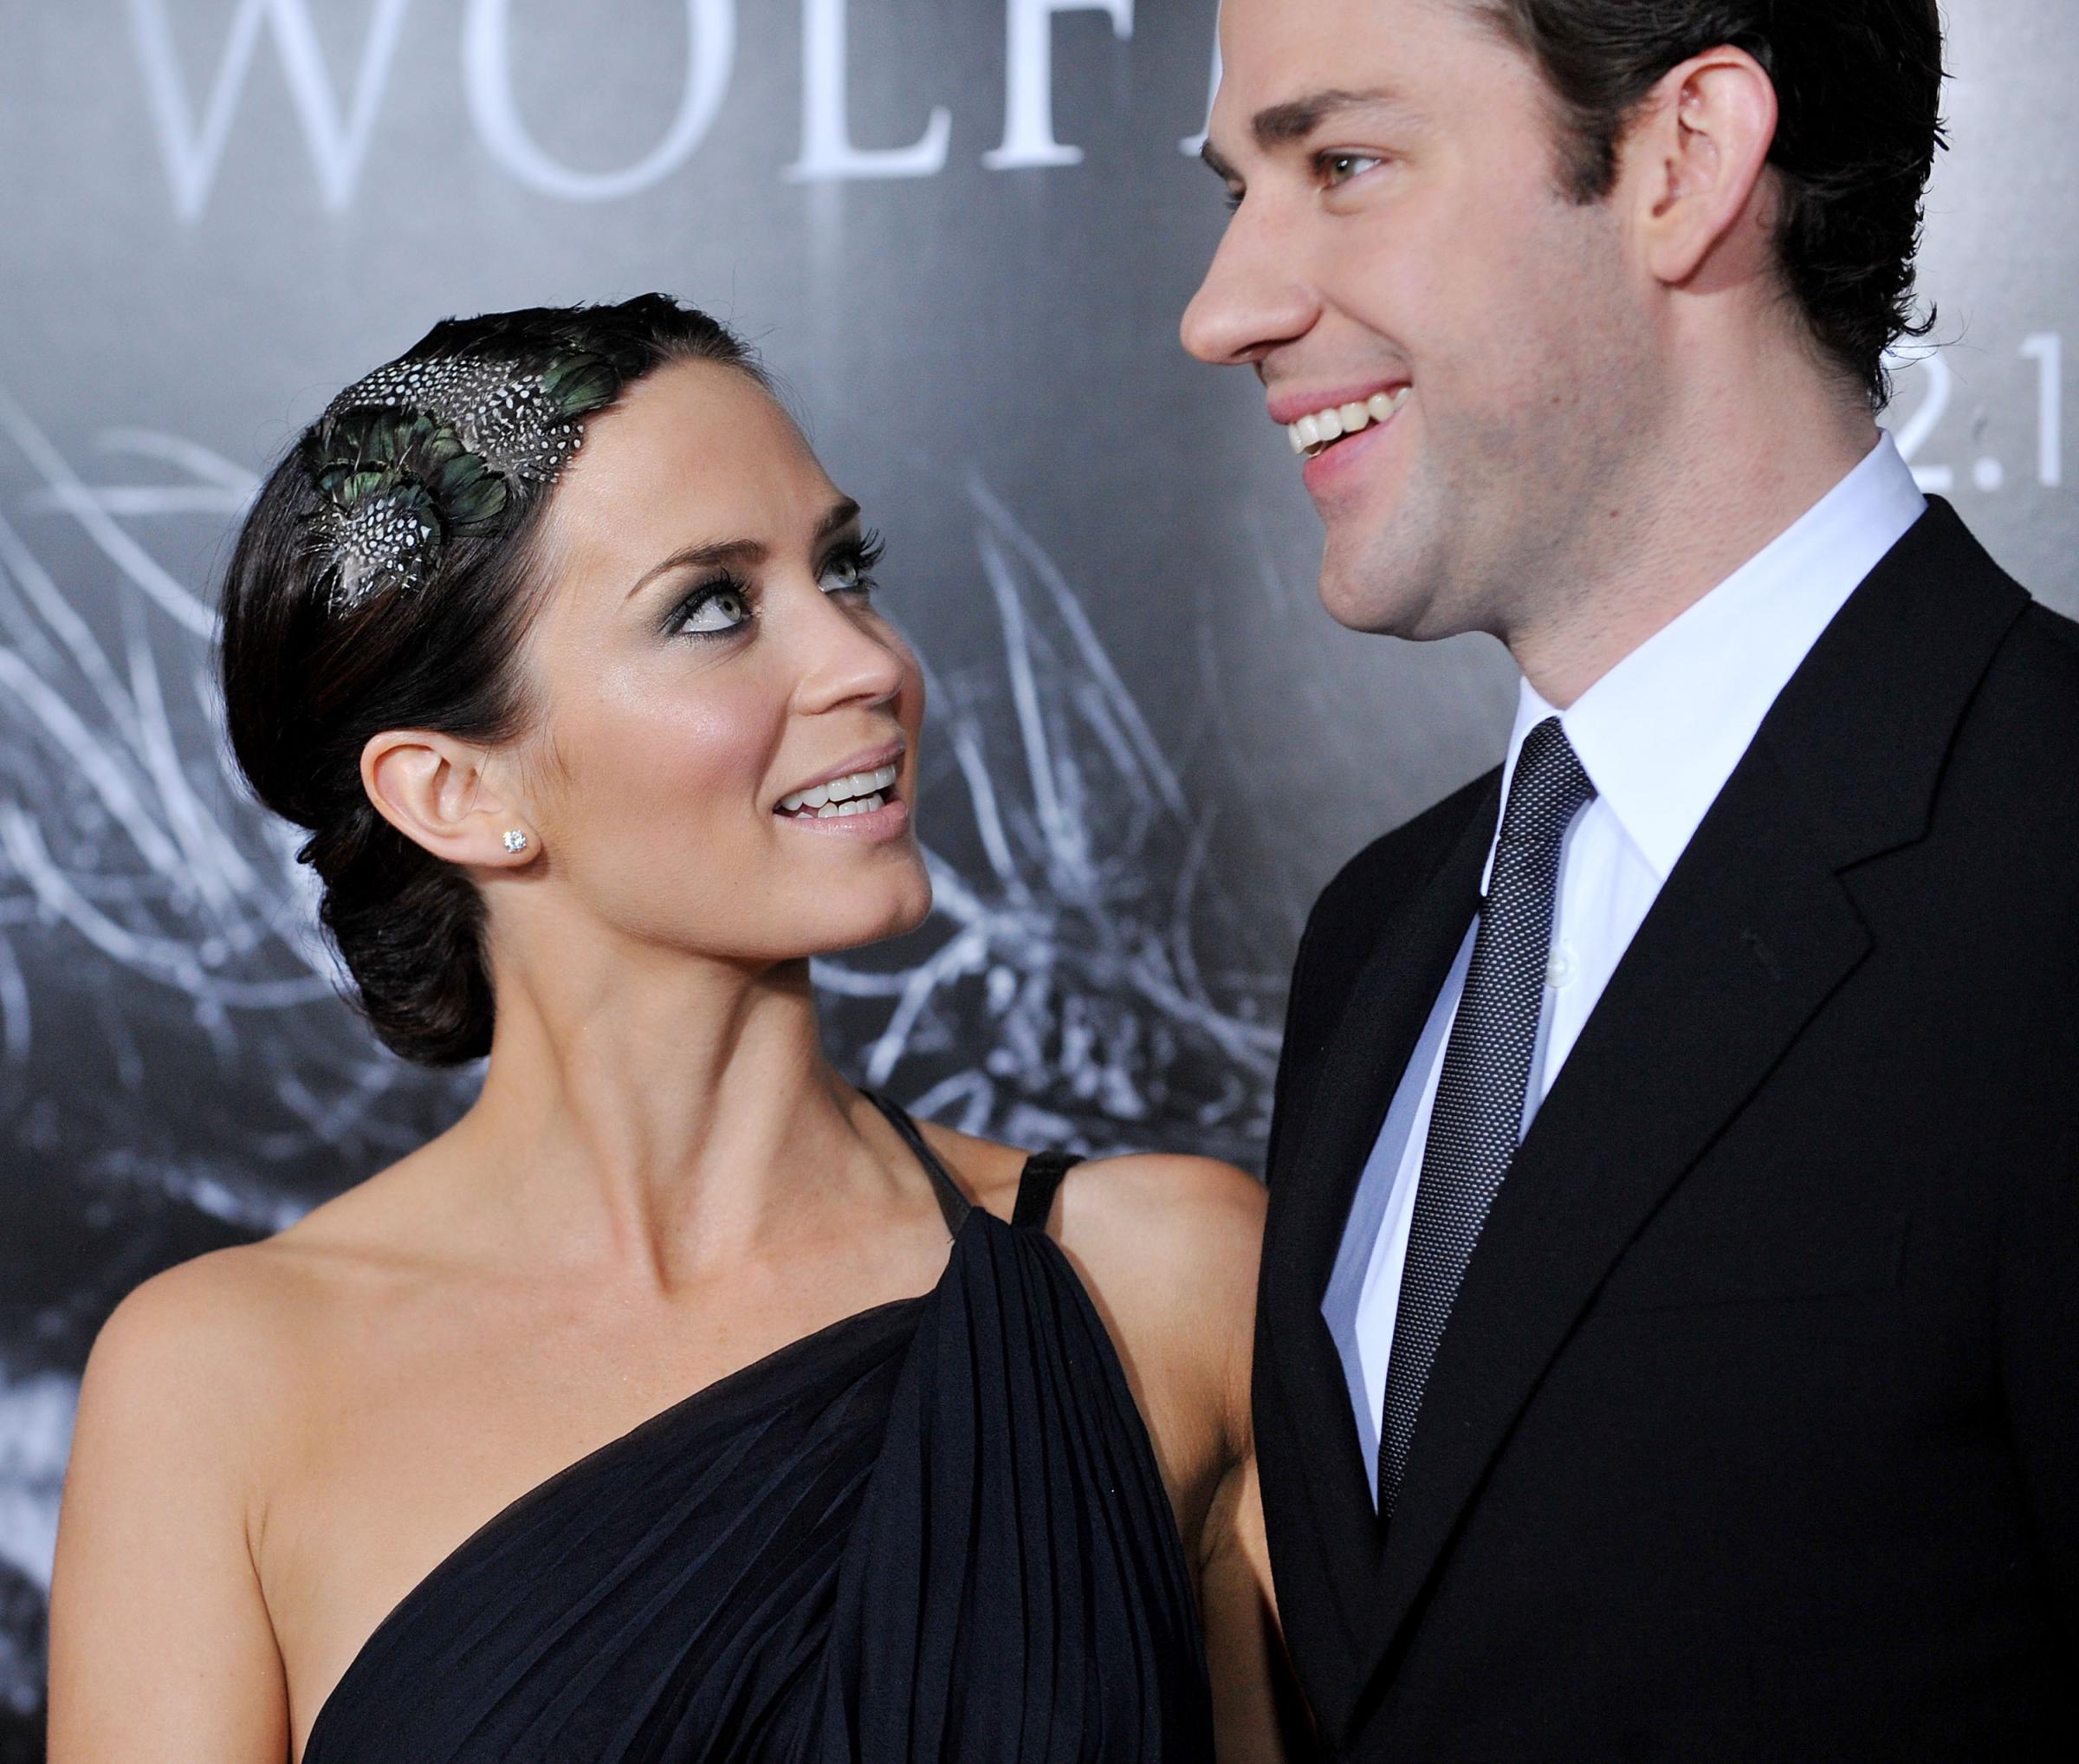 Actress Emily Blunt and actor John Krasinski arrive at the Los Angeles Premiere "The Wolfman"